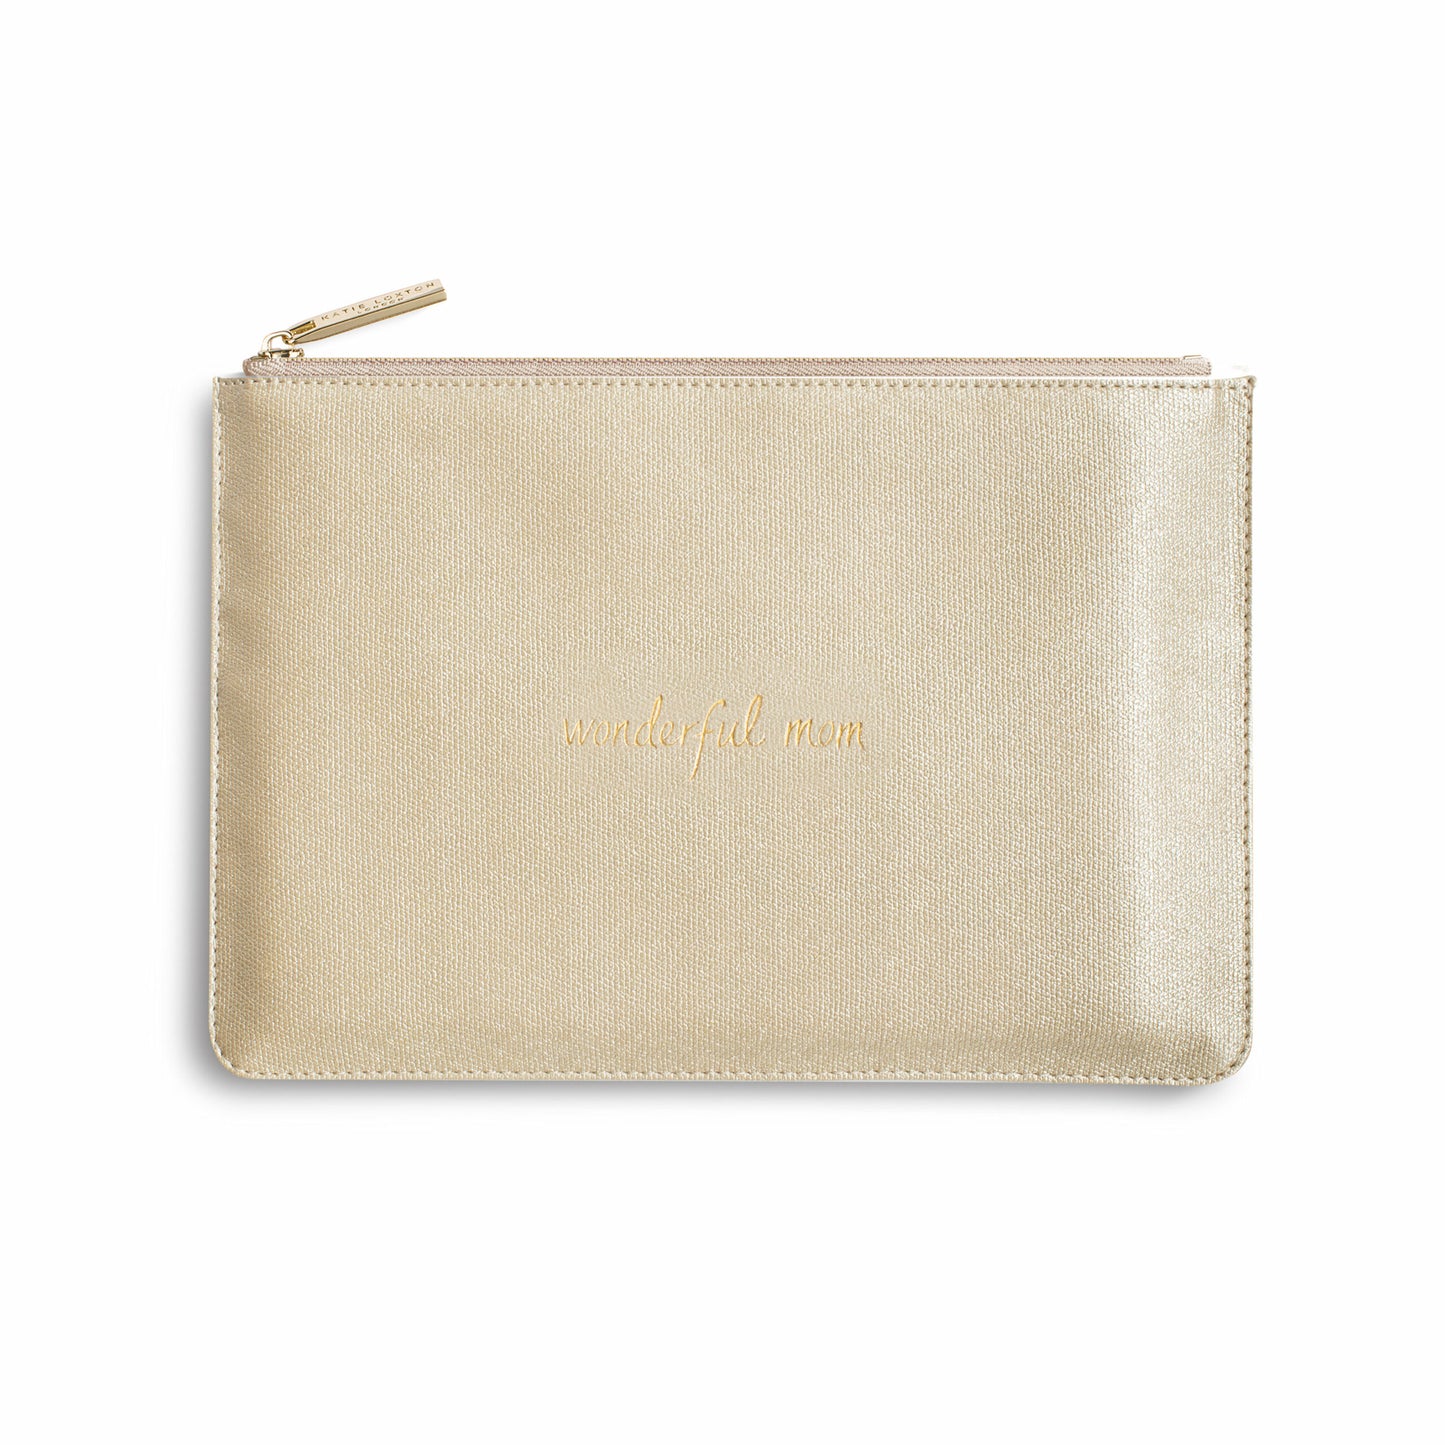 Katie Loxton Wonderful Mom Pouch Gold